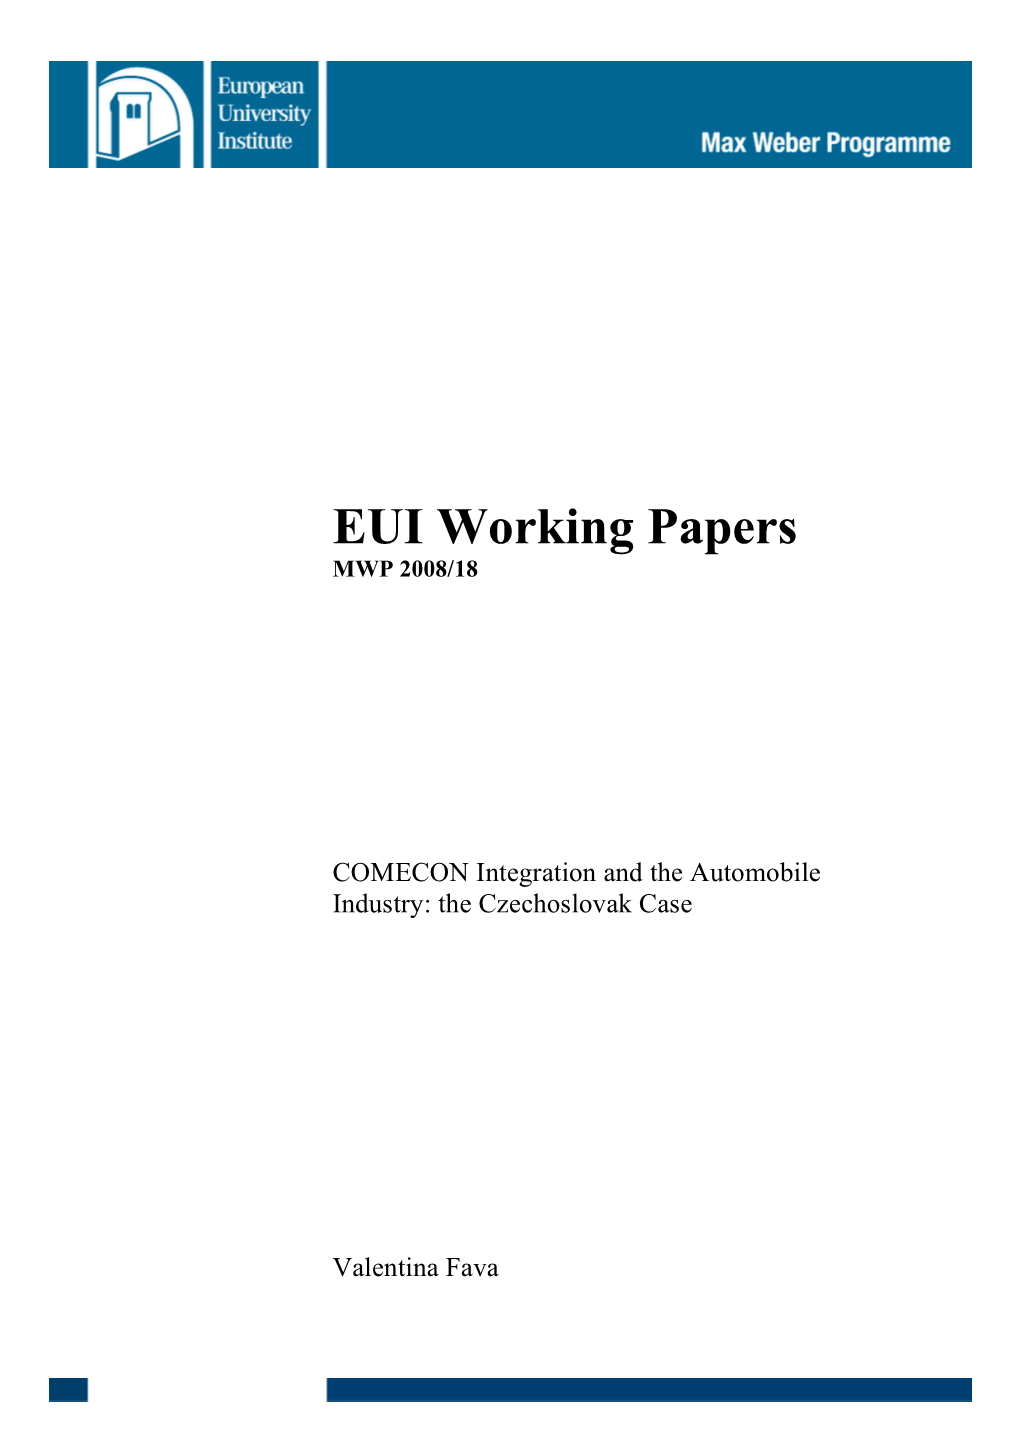 EUI Working Papers MWP 2008/18